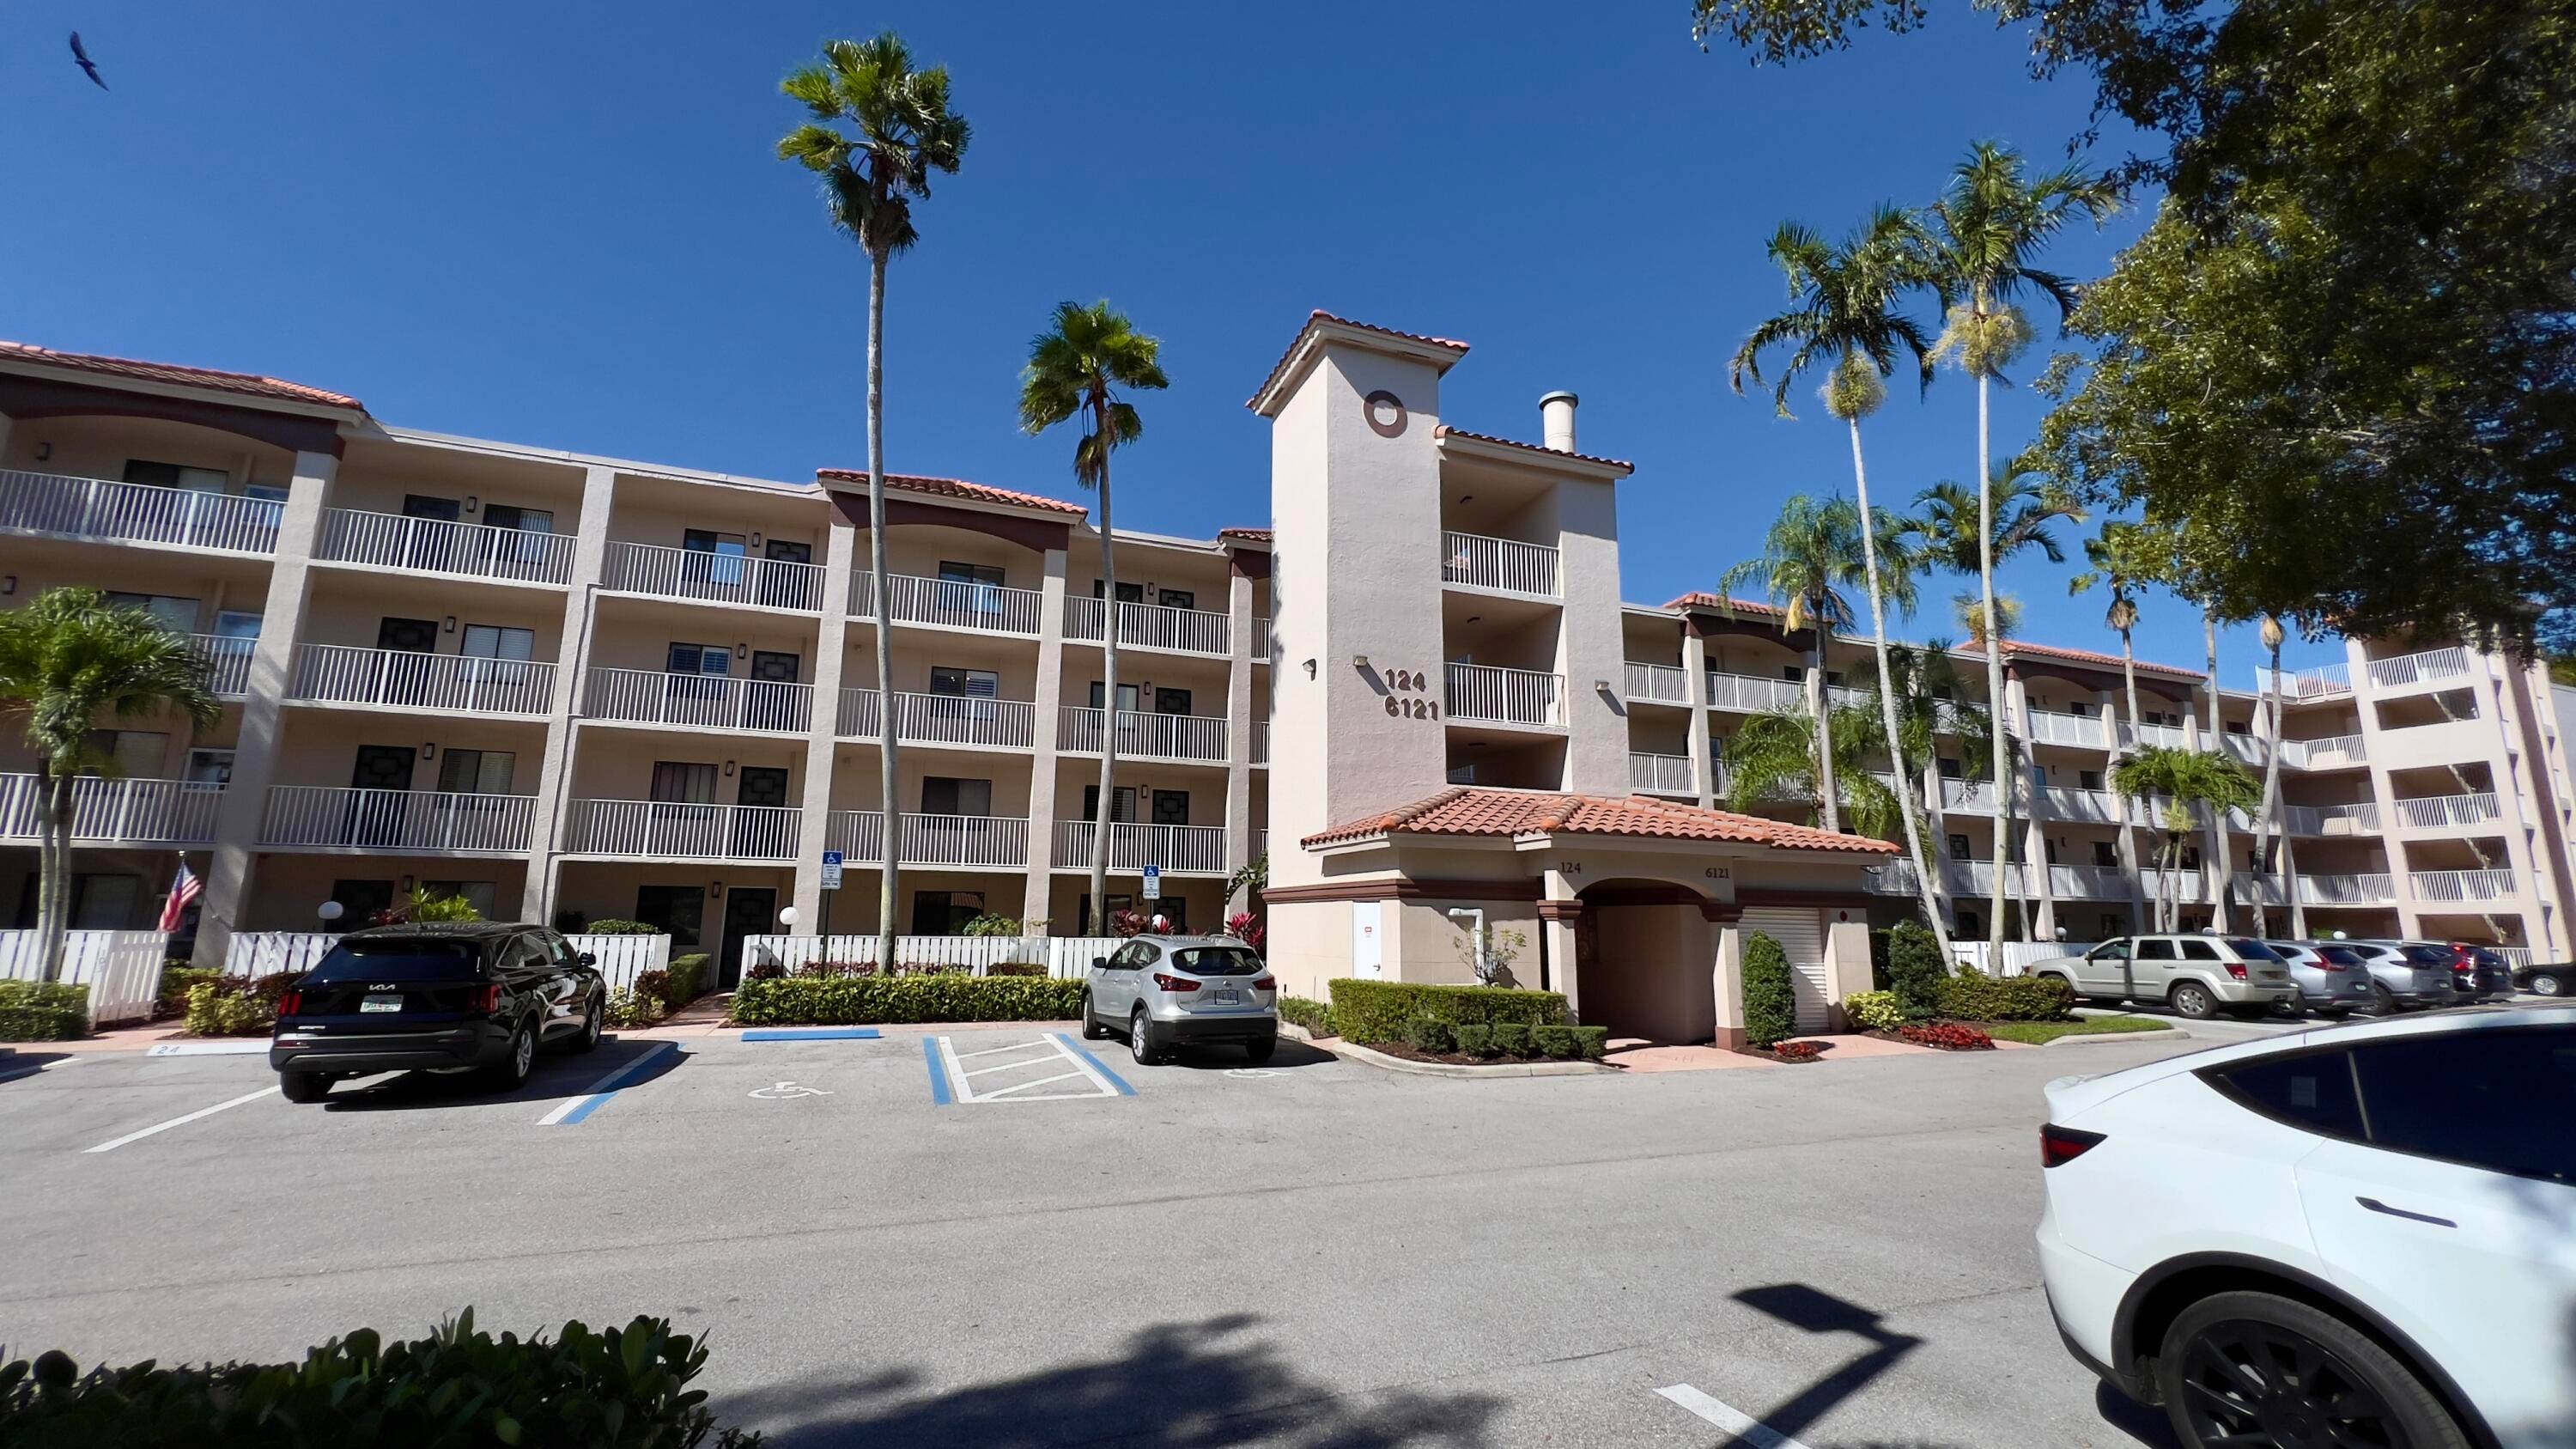 Enjoy Paradise in this beautiful 2 Bedroom, 2 bathroom with a den office space Condo.